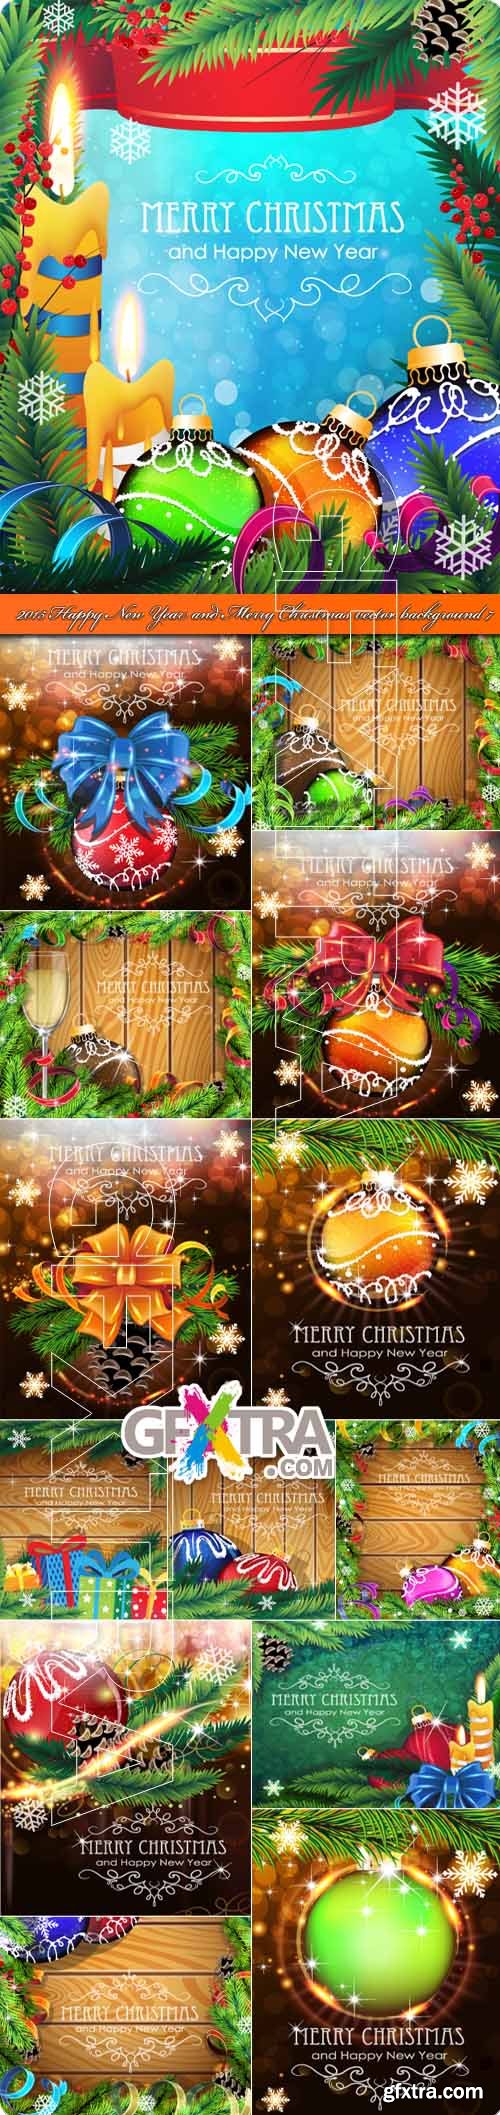 2015 Happy New Year and Merry Christmas vector background 7